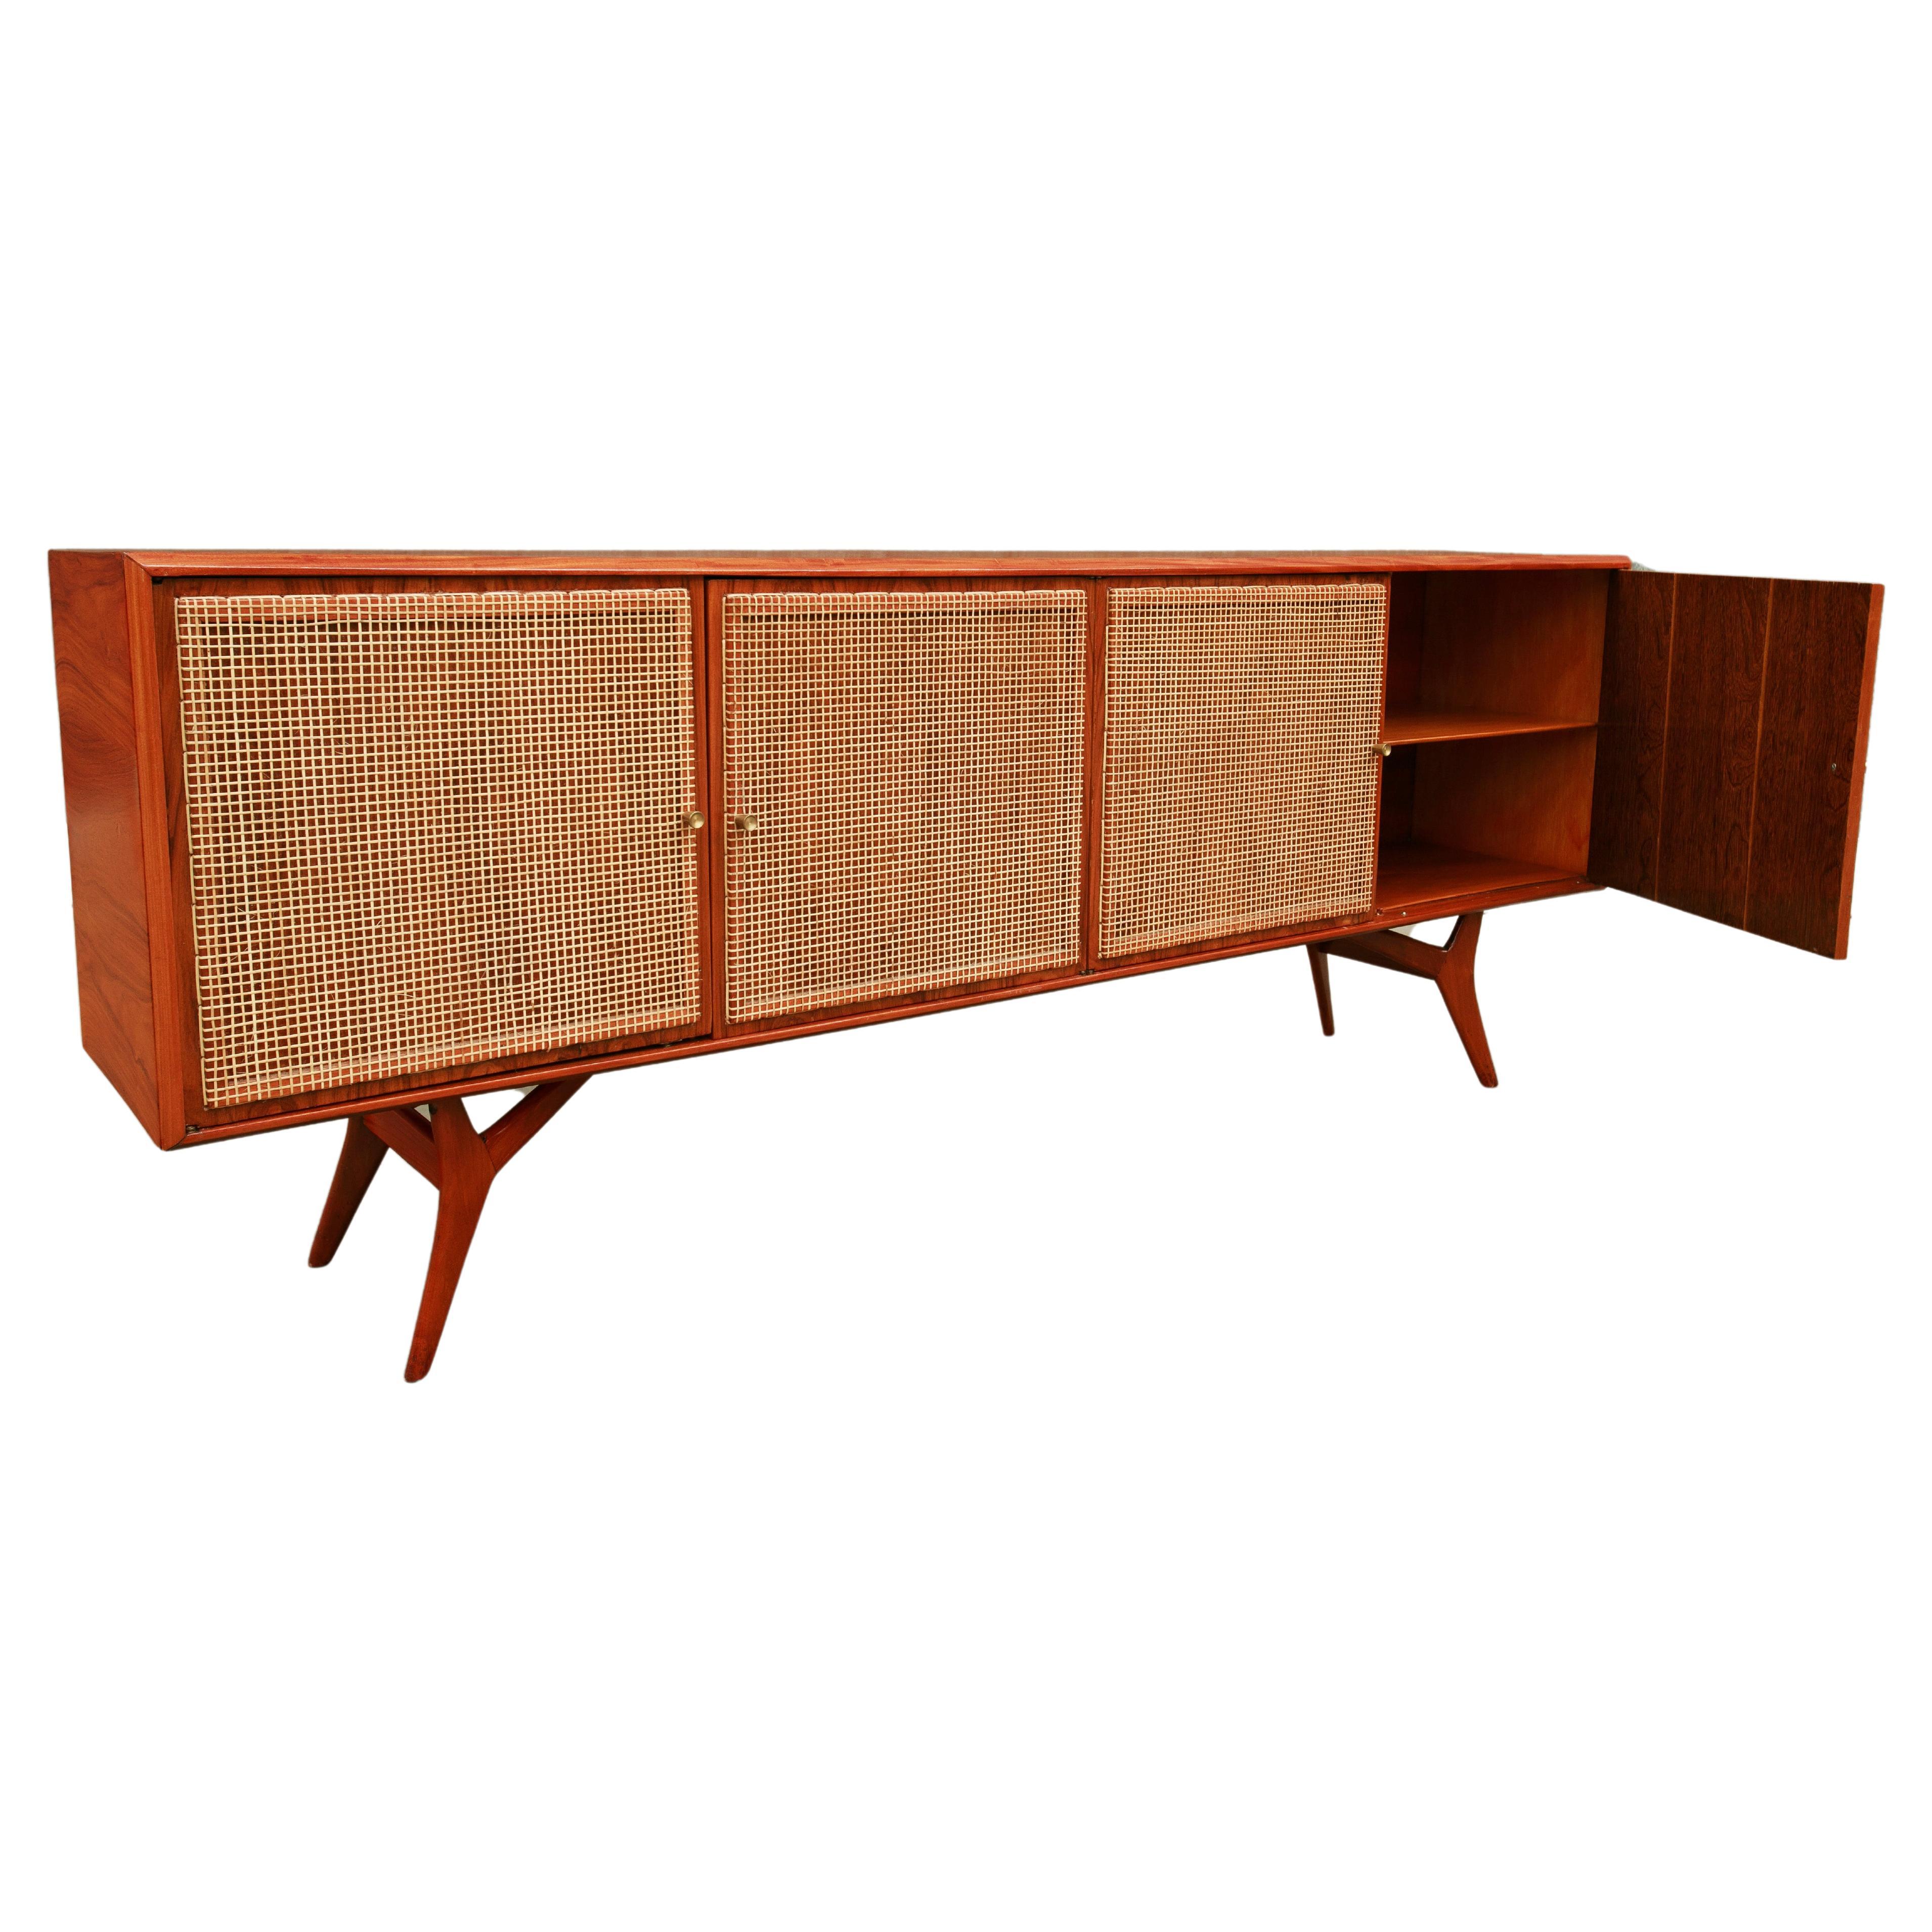 1950s Brazilian Modern Credenza in Hardwood & Caning by Forma